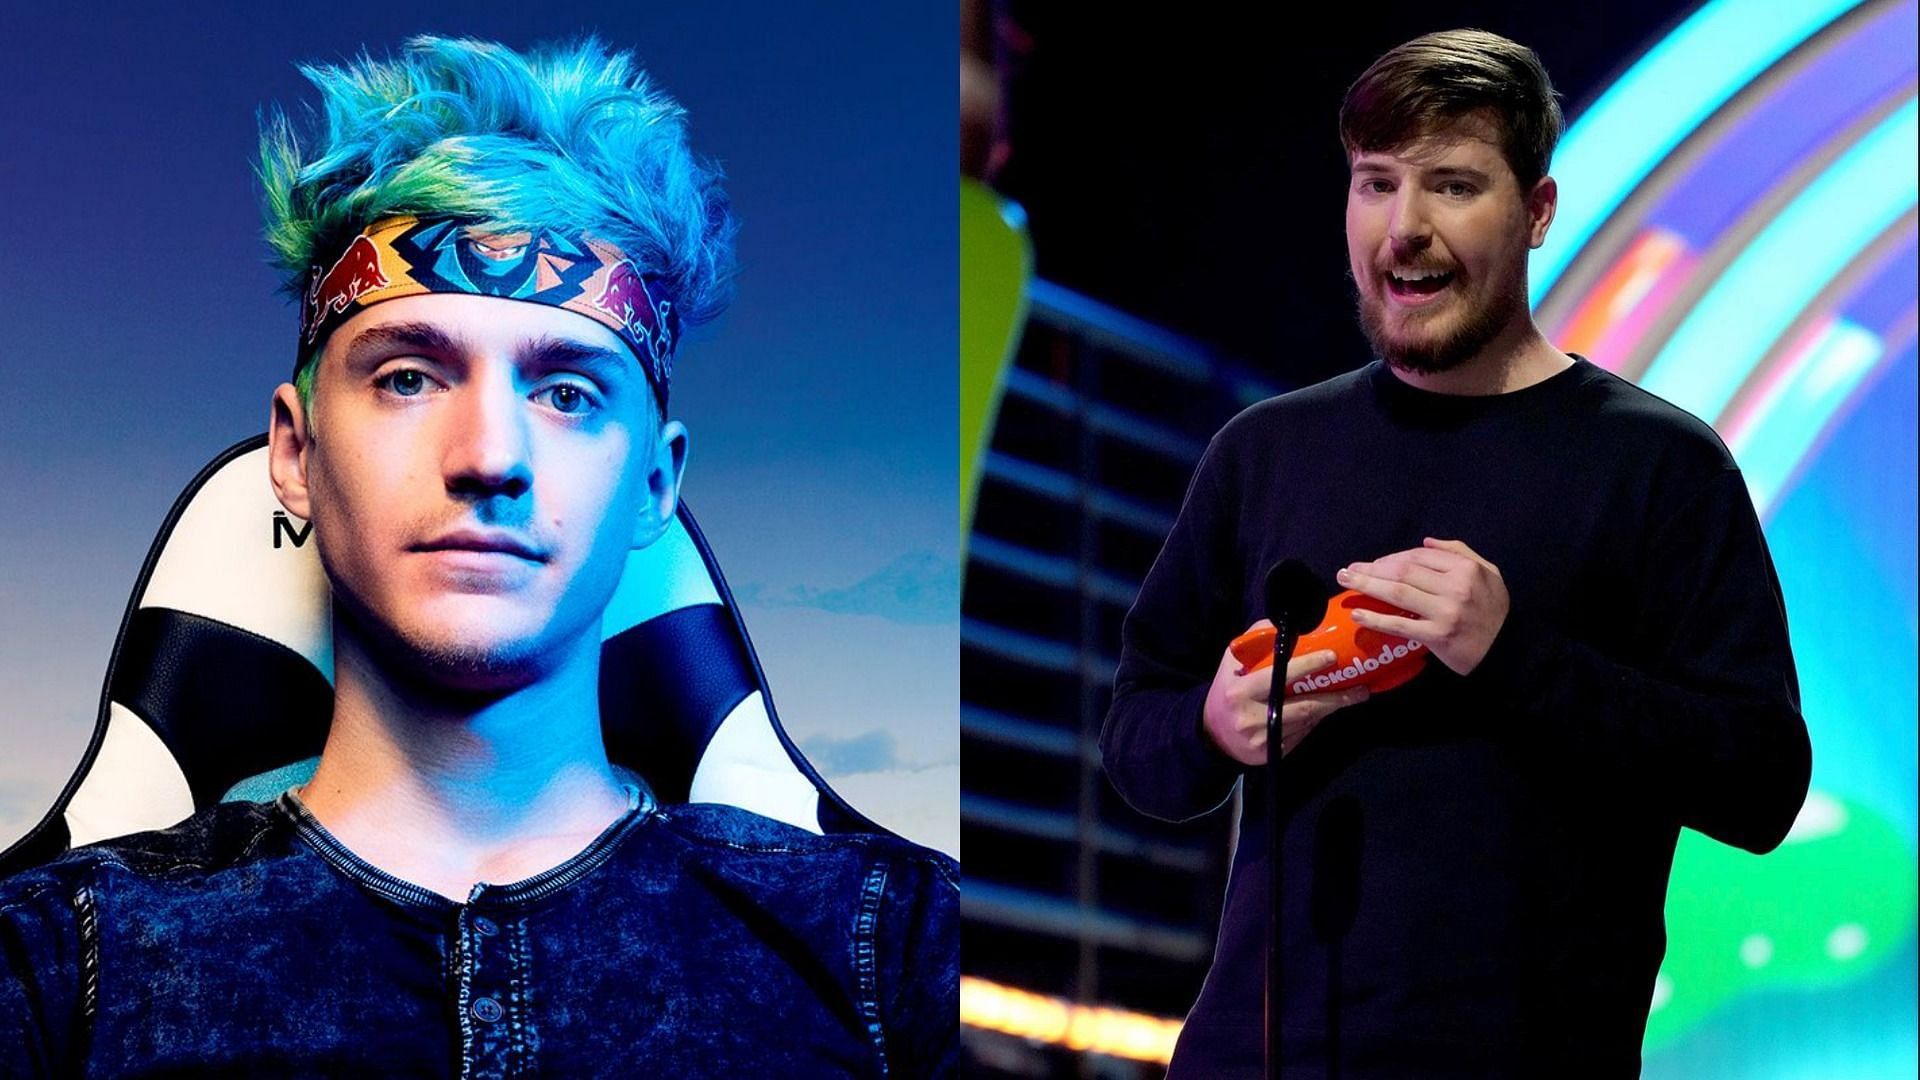 Ninja and MrBeast had a brief bit of banter over who would win in a battle in League of Legends (Image via Ninja &amp; MrBeast/Twitter)